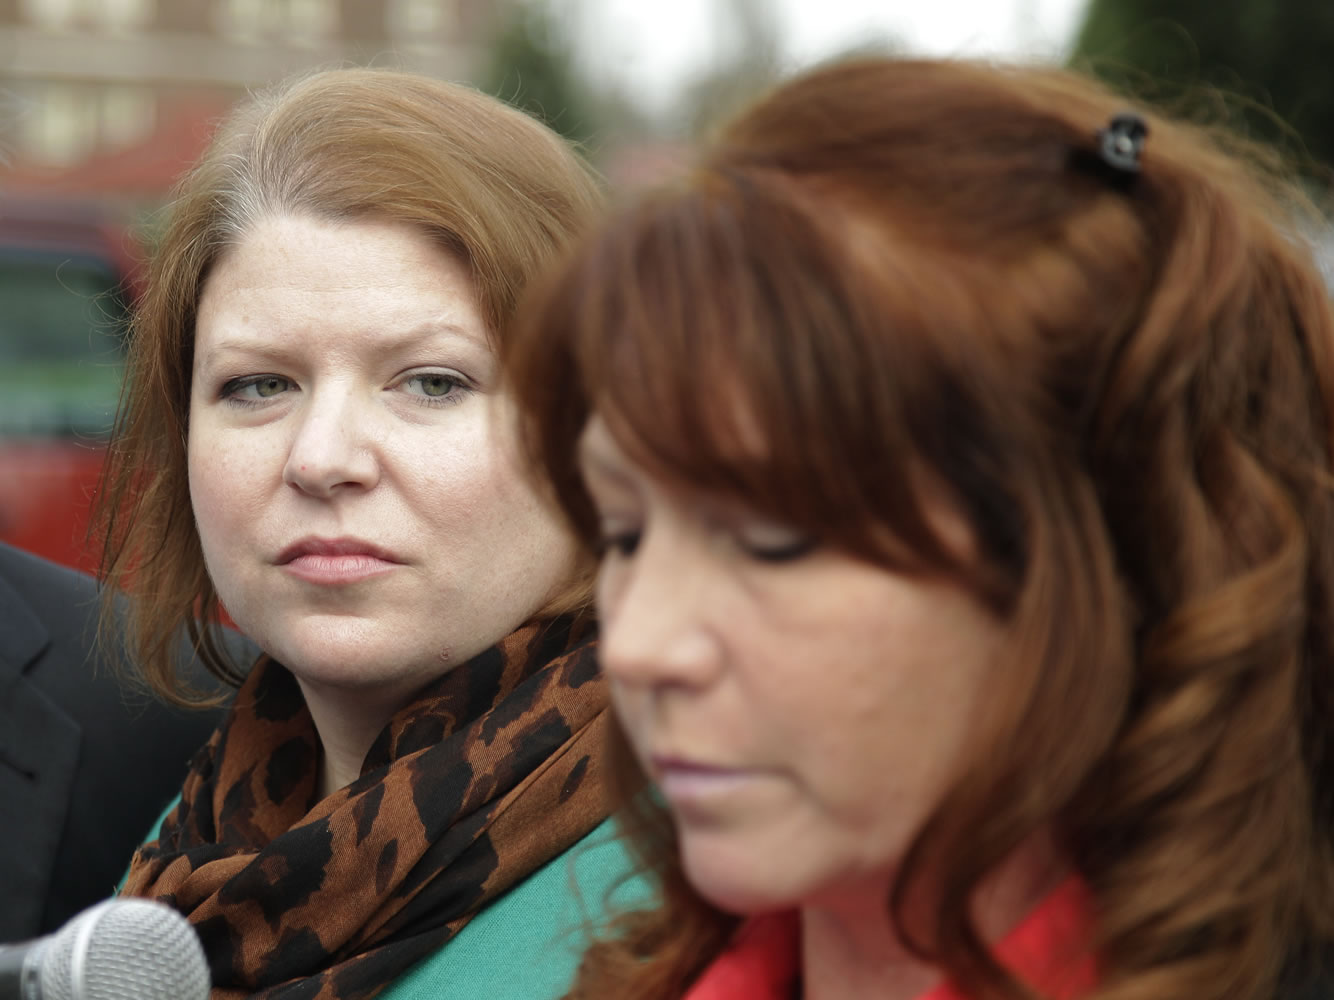 Kari Bales, left, listens as her sister, Stephanie Tandberg, reads a statement to reporters Tuesday outside the military courtroom where a preliminary hearing had just ended for Bales' husband, U.S. Army Staff Sgt.